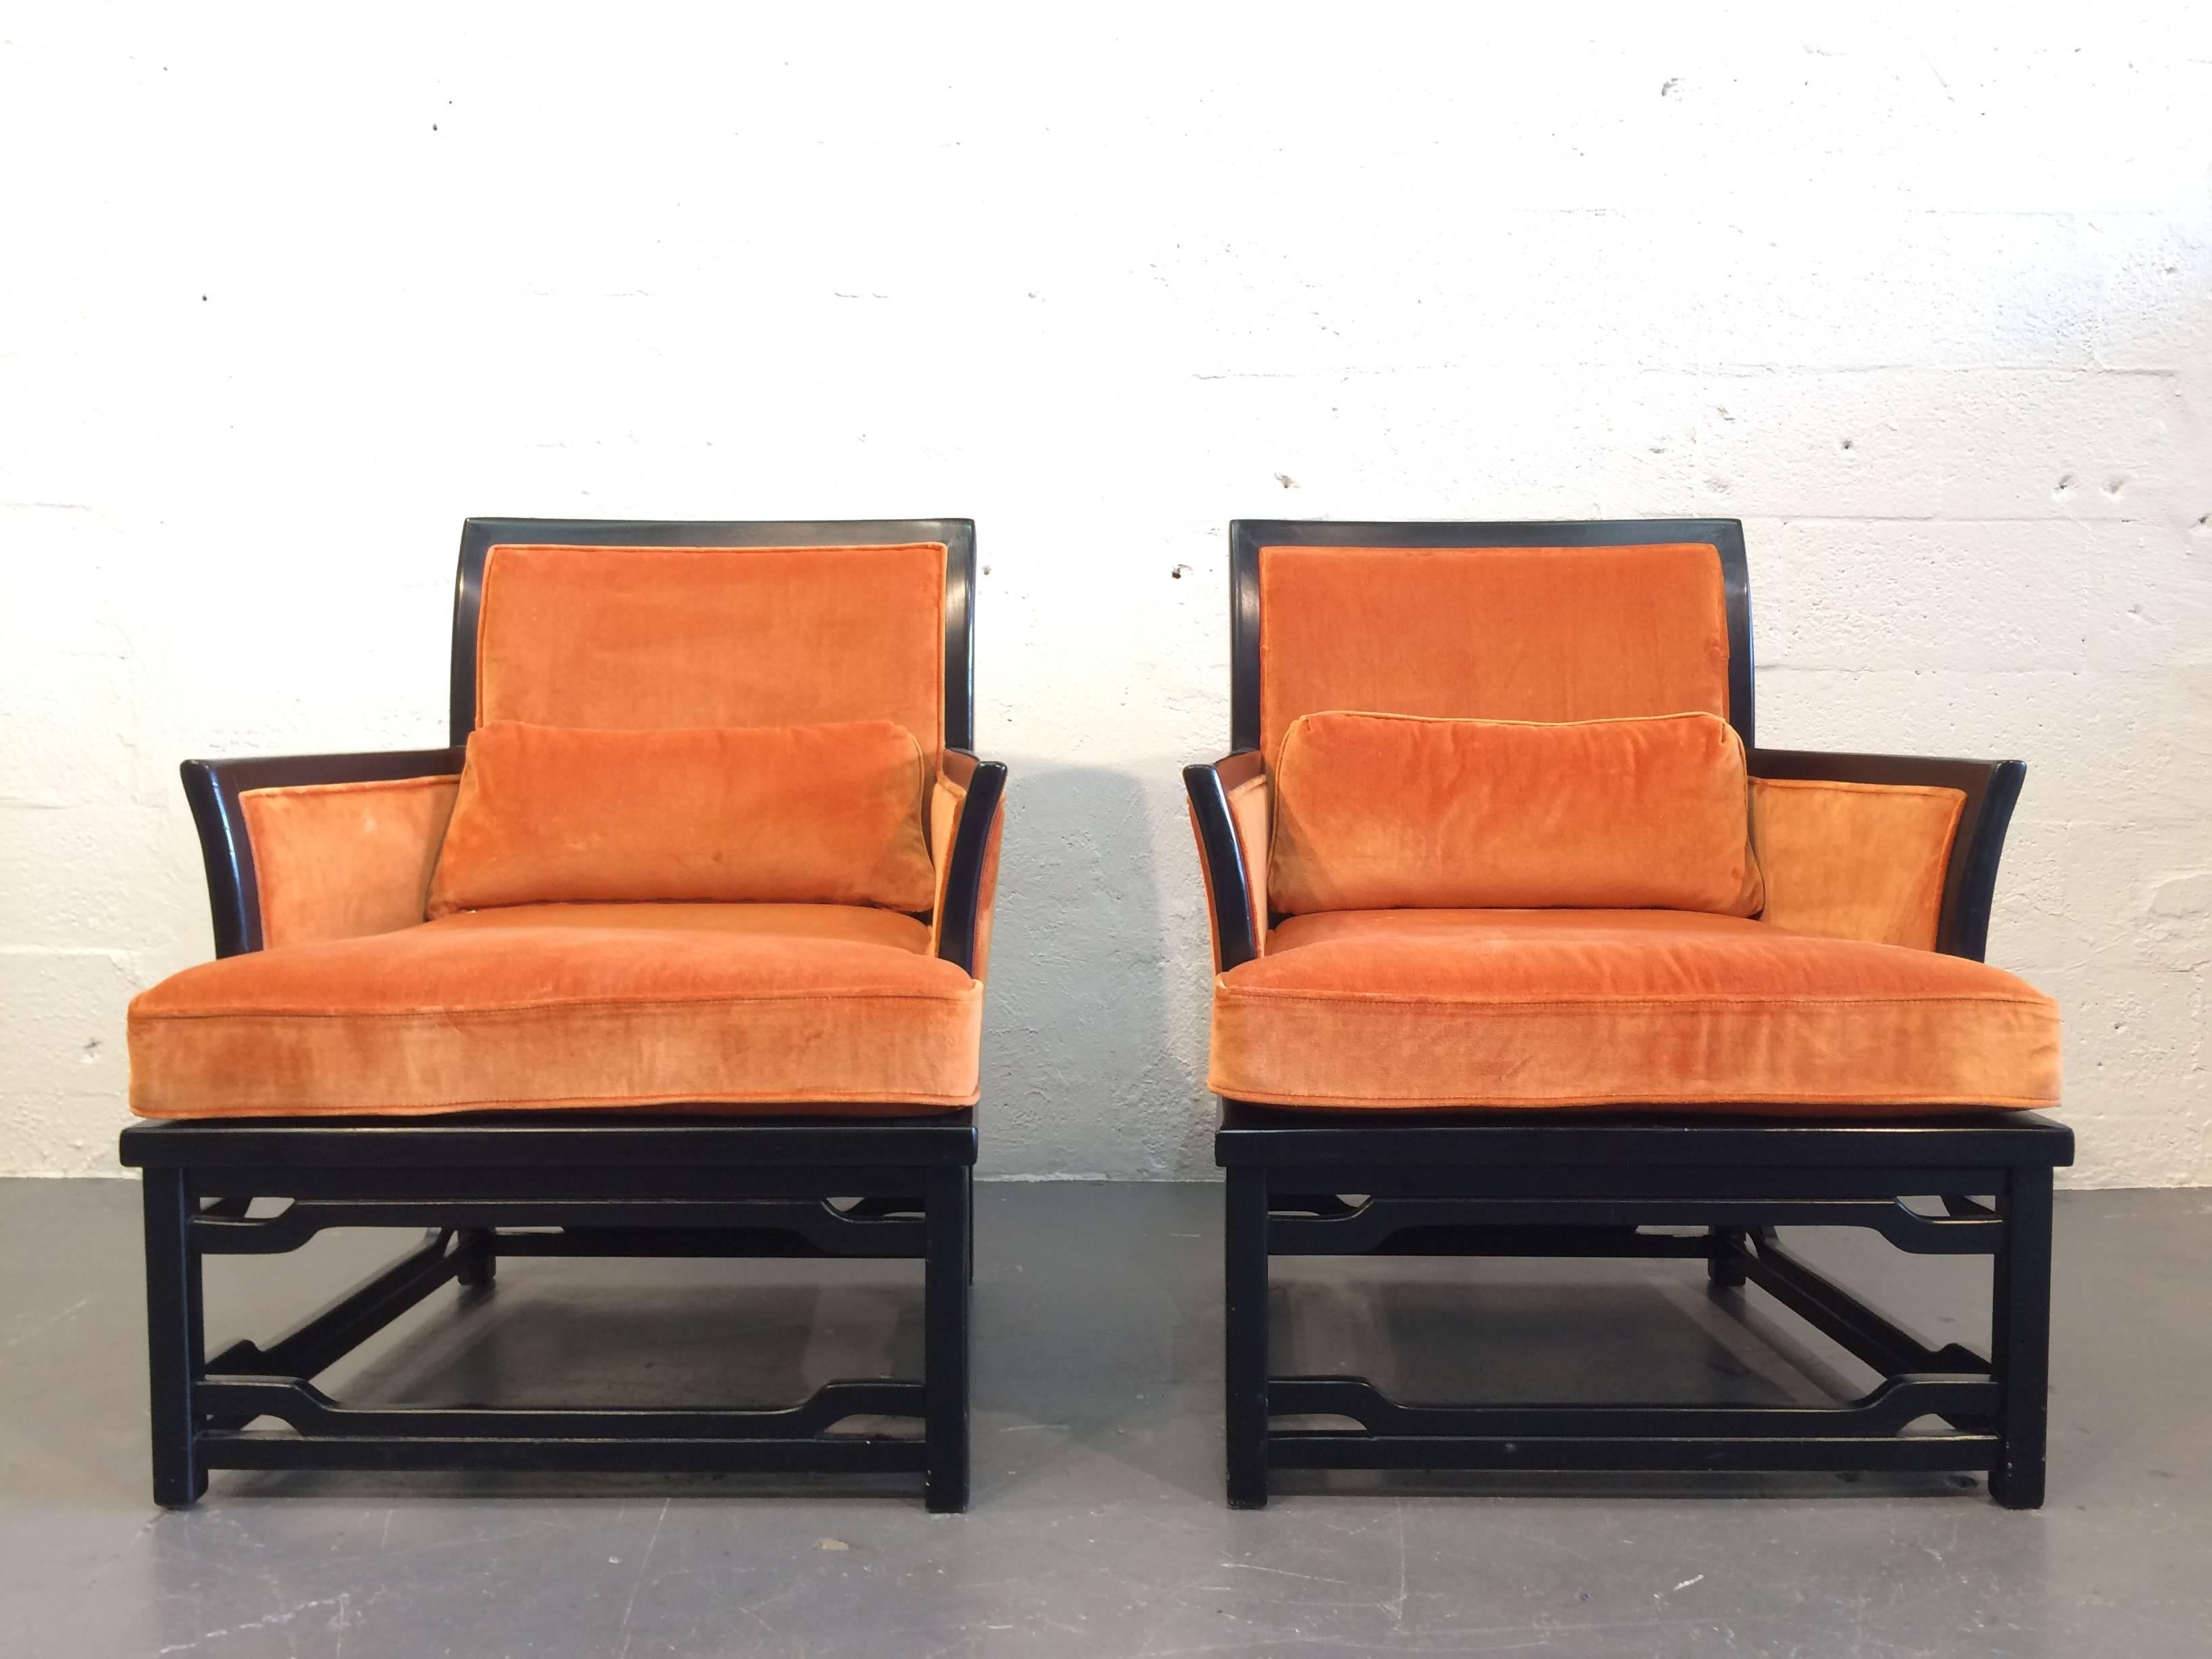 Great pair of lounge chairs in James Mont style.